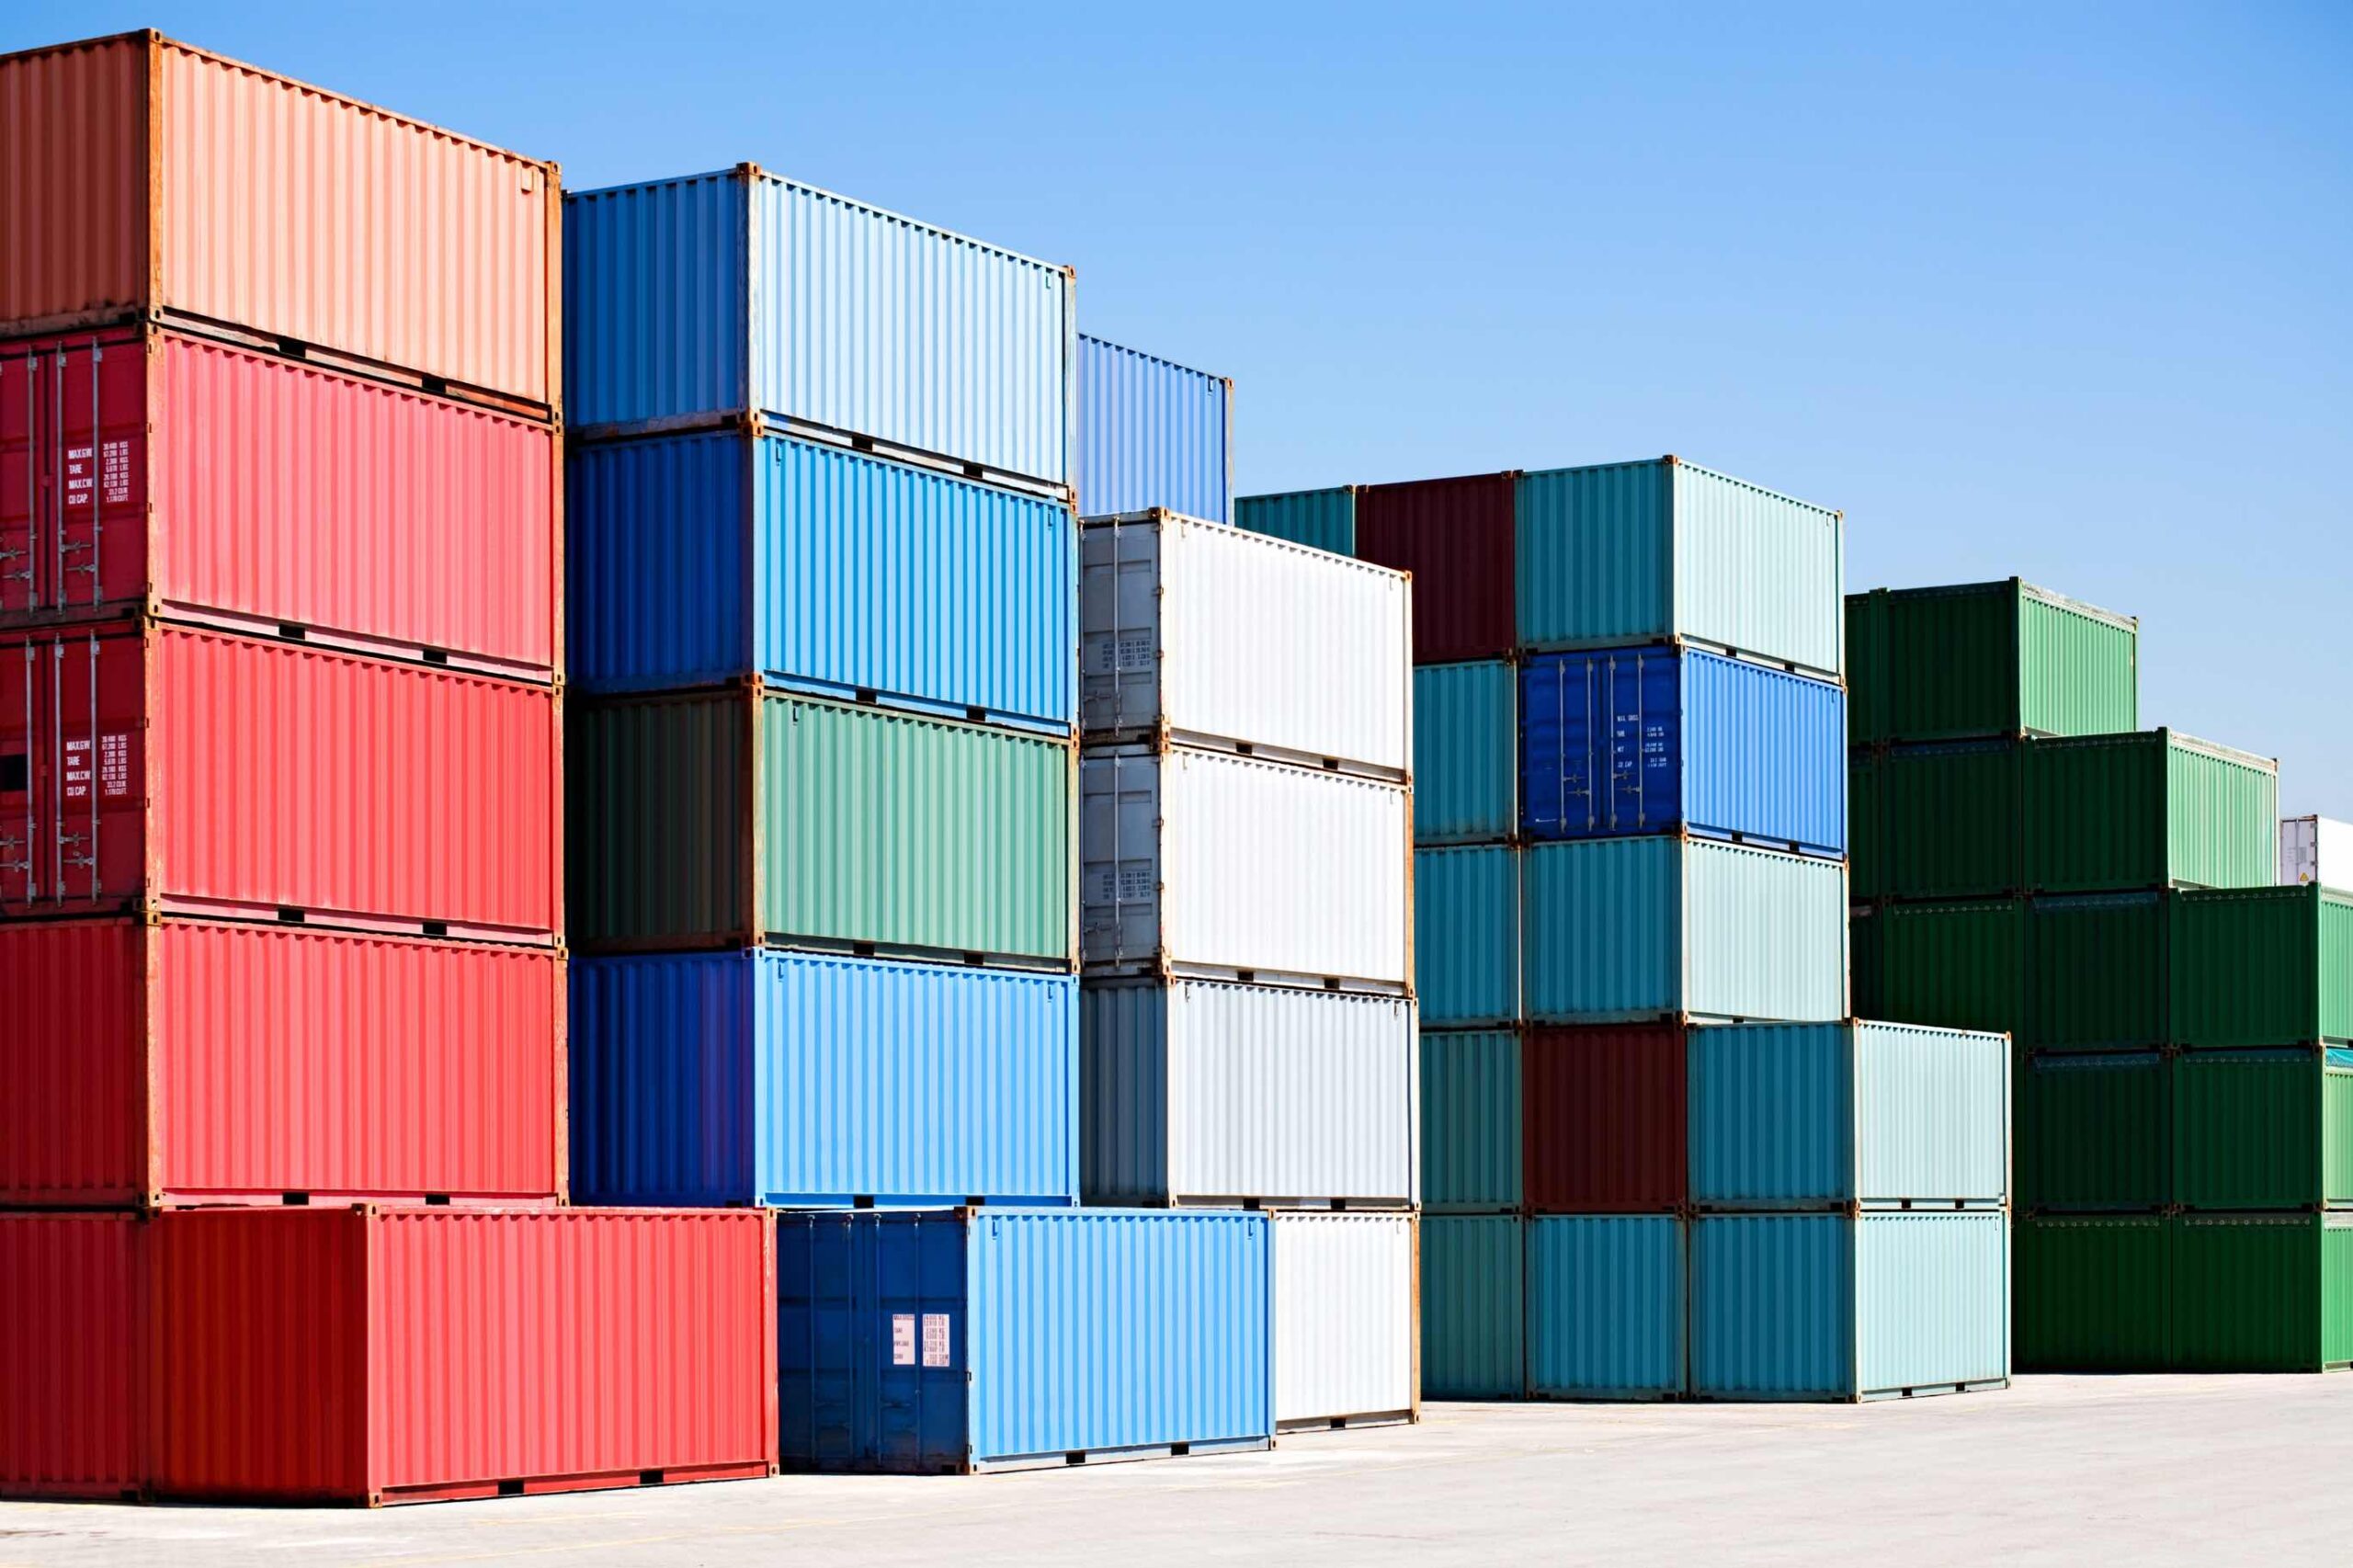 A shipping container yard with stacks of cargo containers.